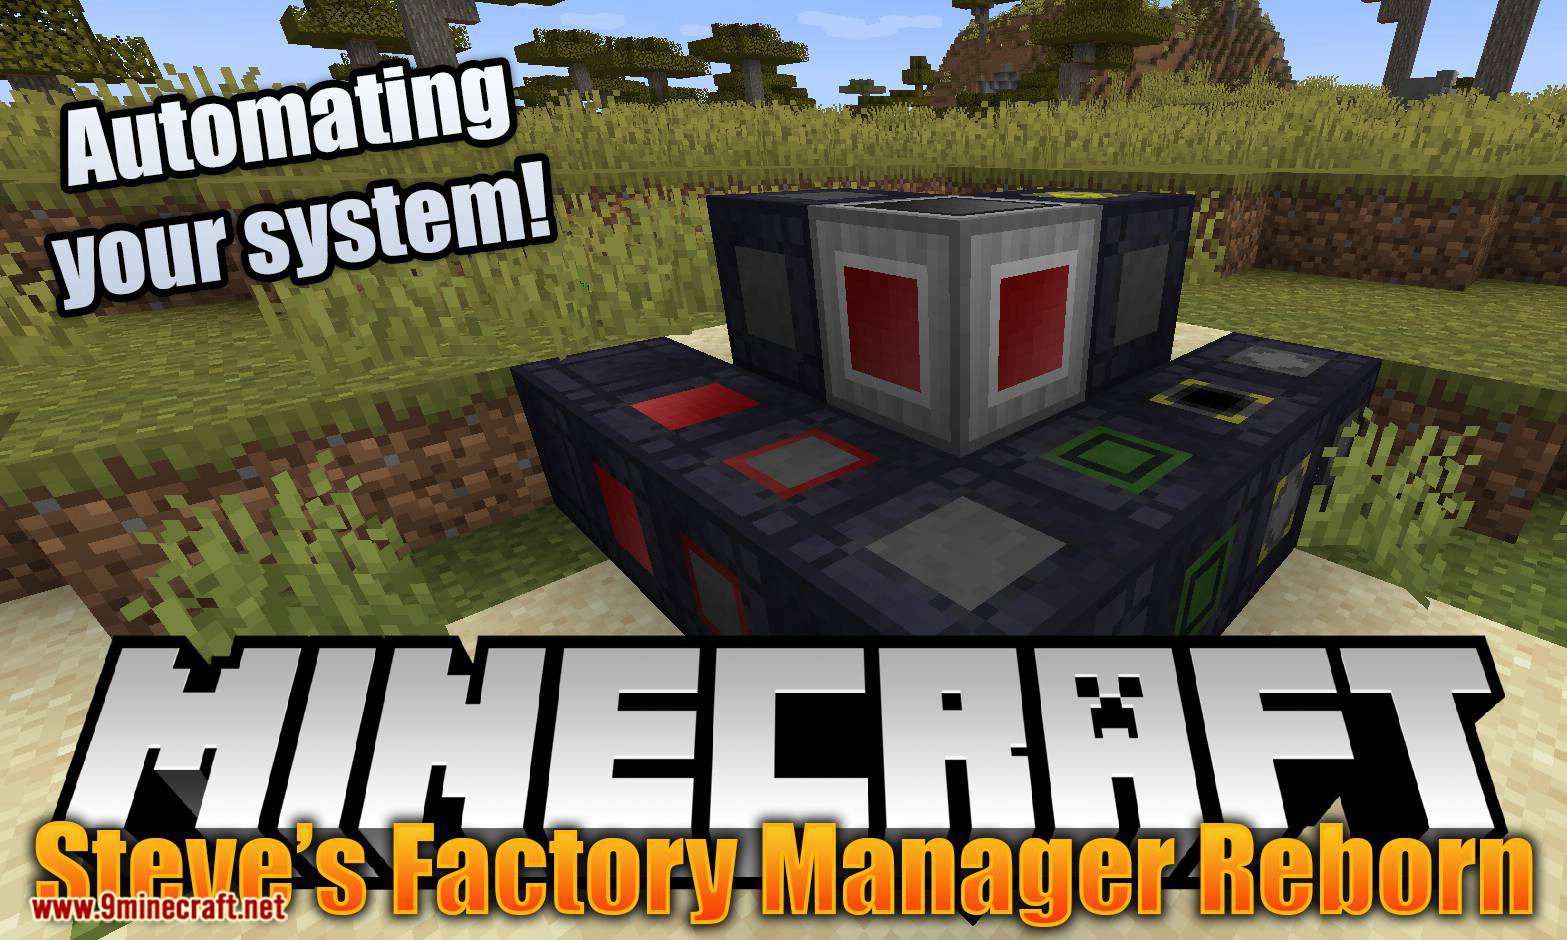 Steve's Factory Manager Reborn Mod 1.15.2, 1.14.4 (Automating Your System) 1